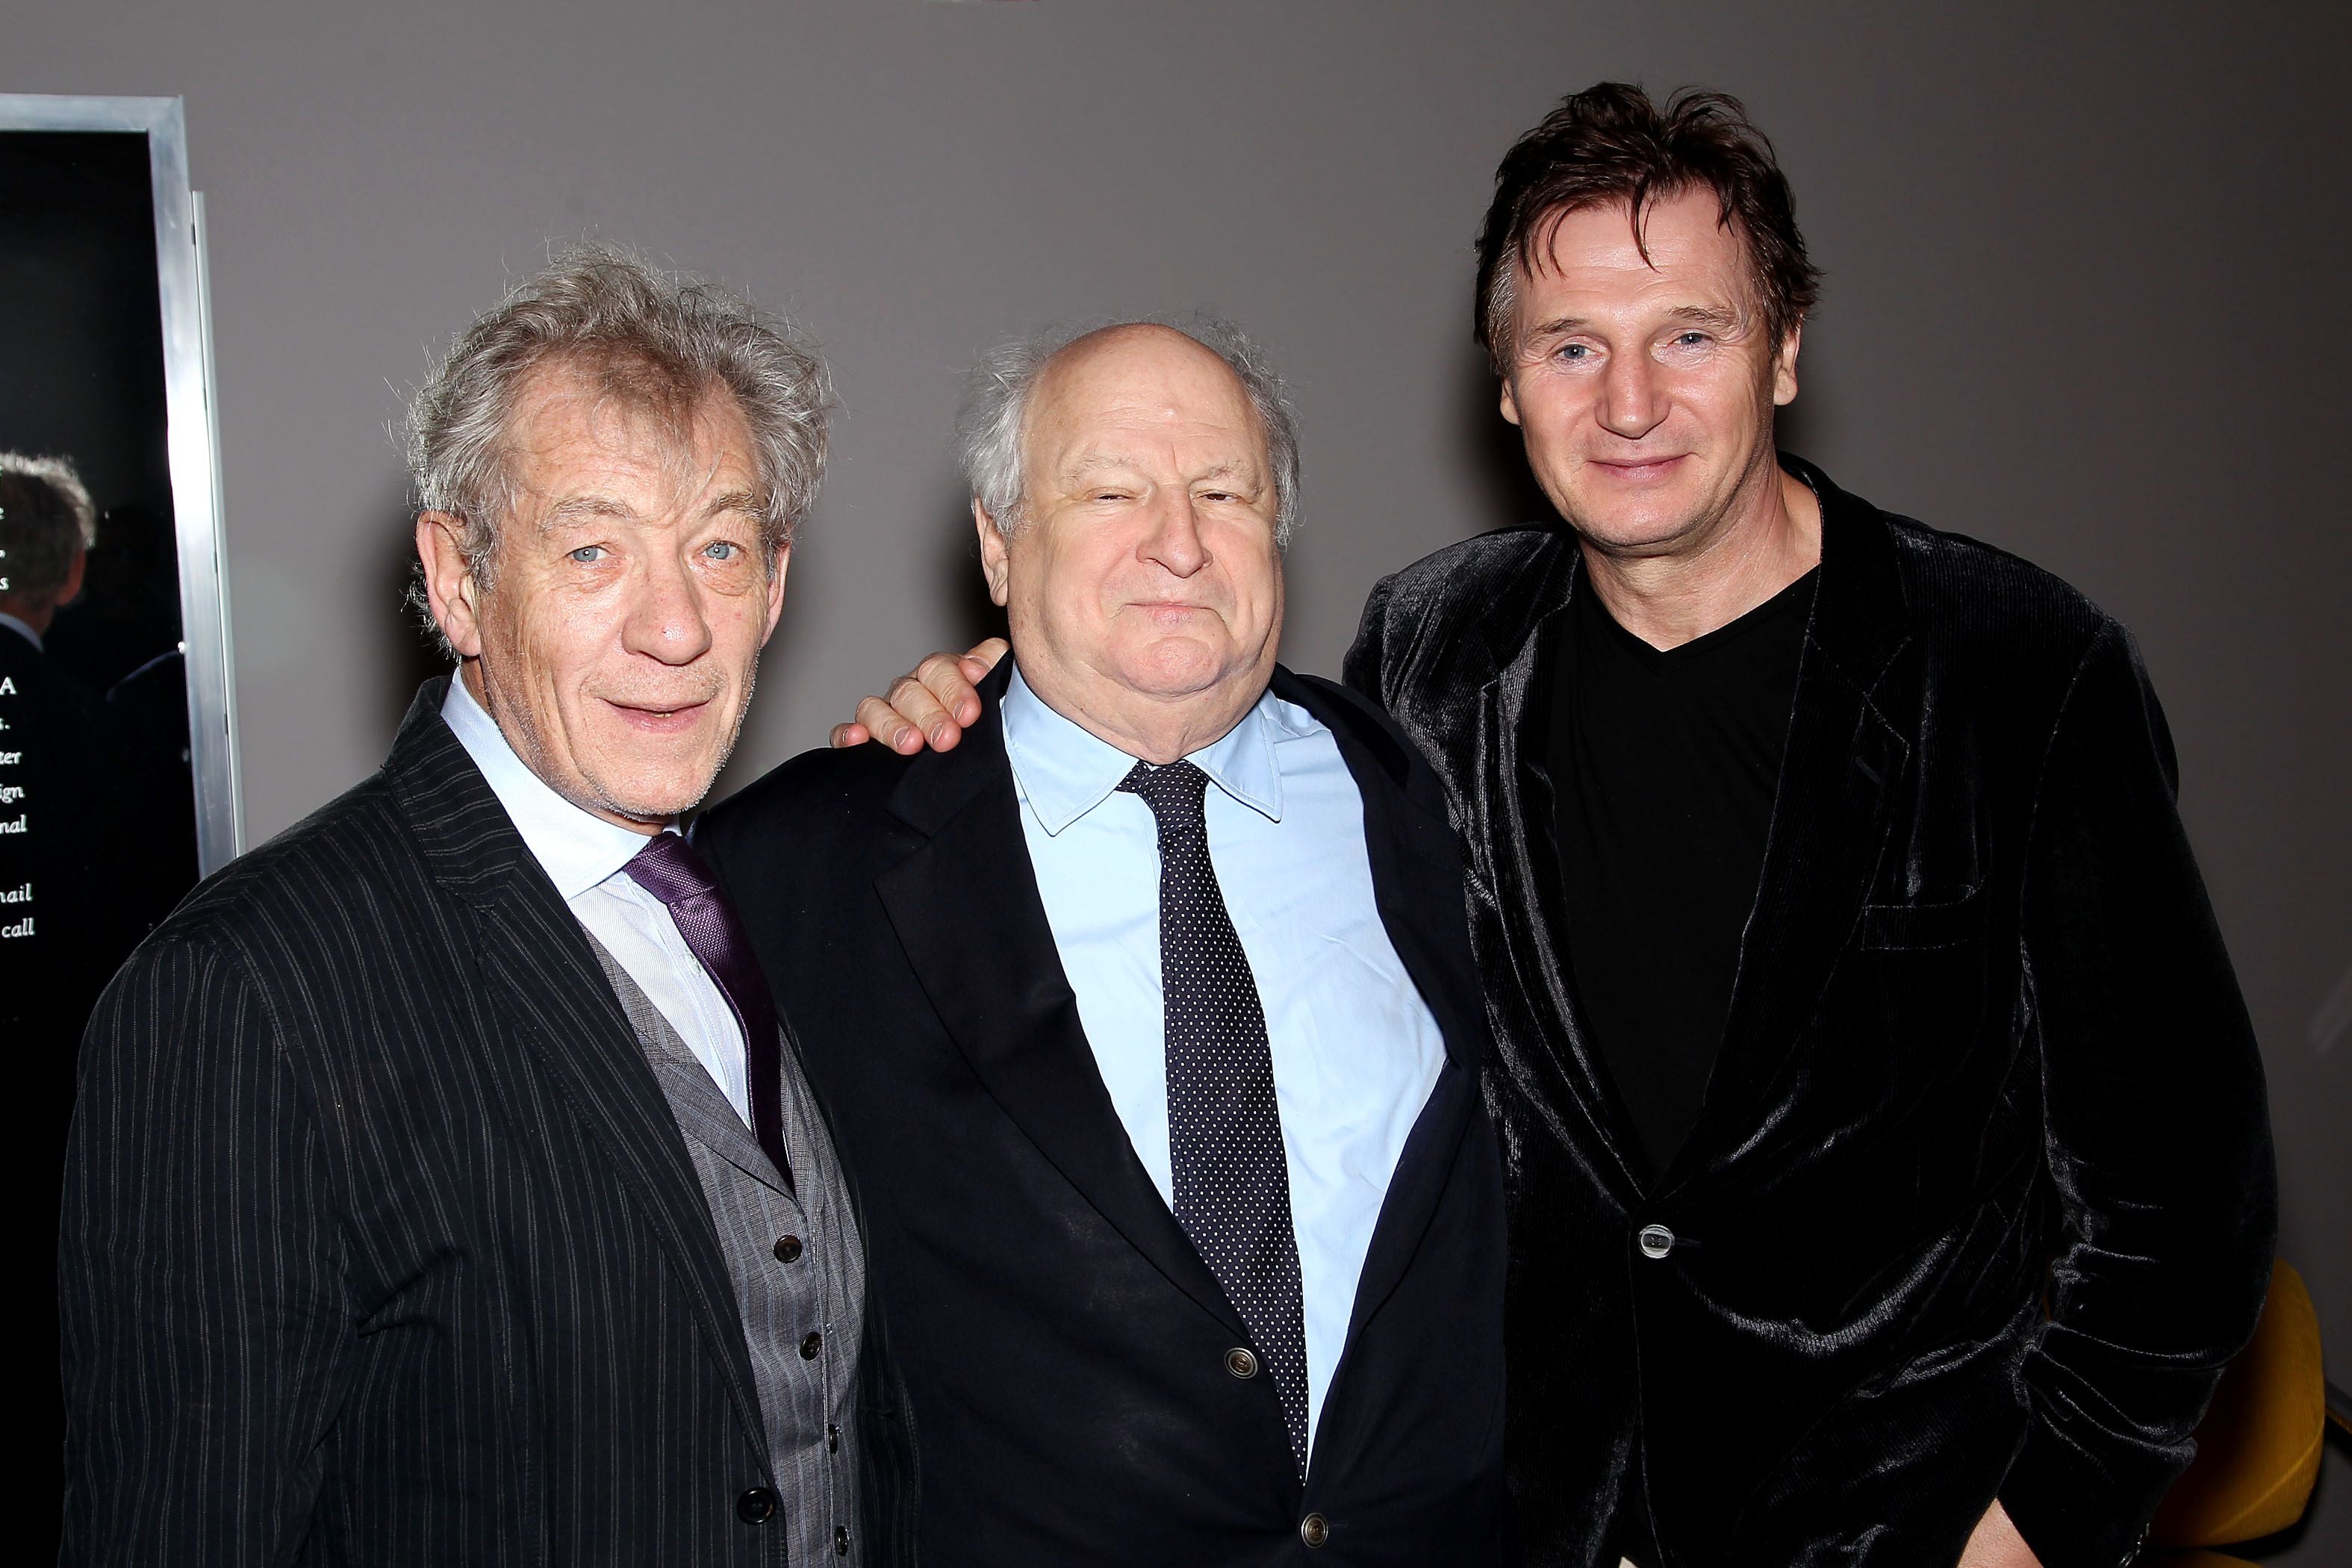 With Ian McKellen and Liam Neeson at the 13th annual Savannah Film Festival in 2010